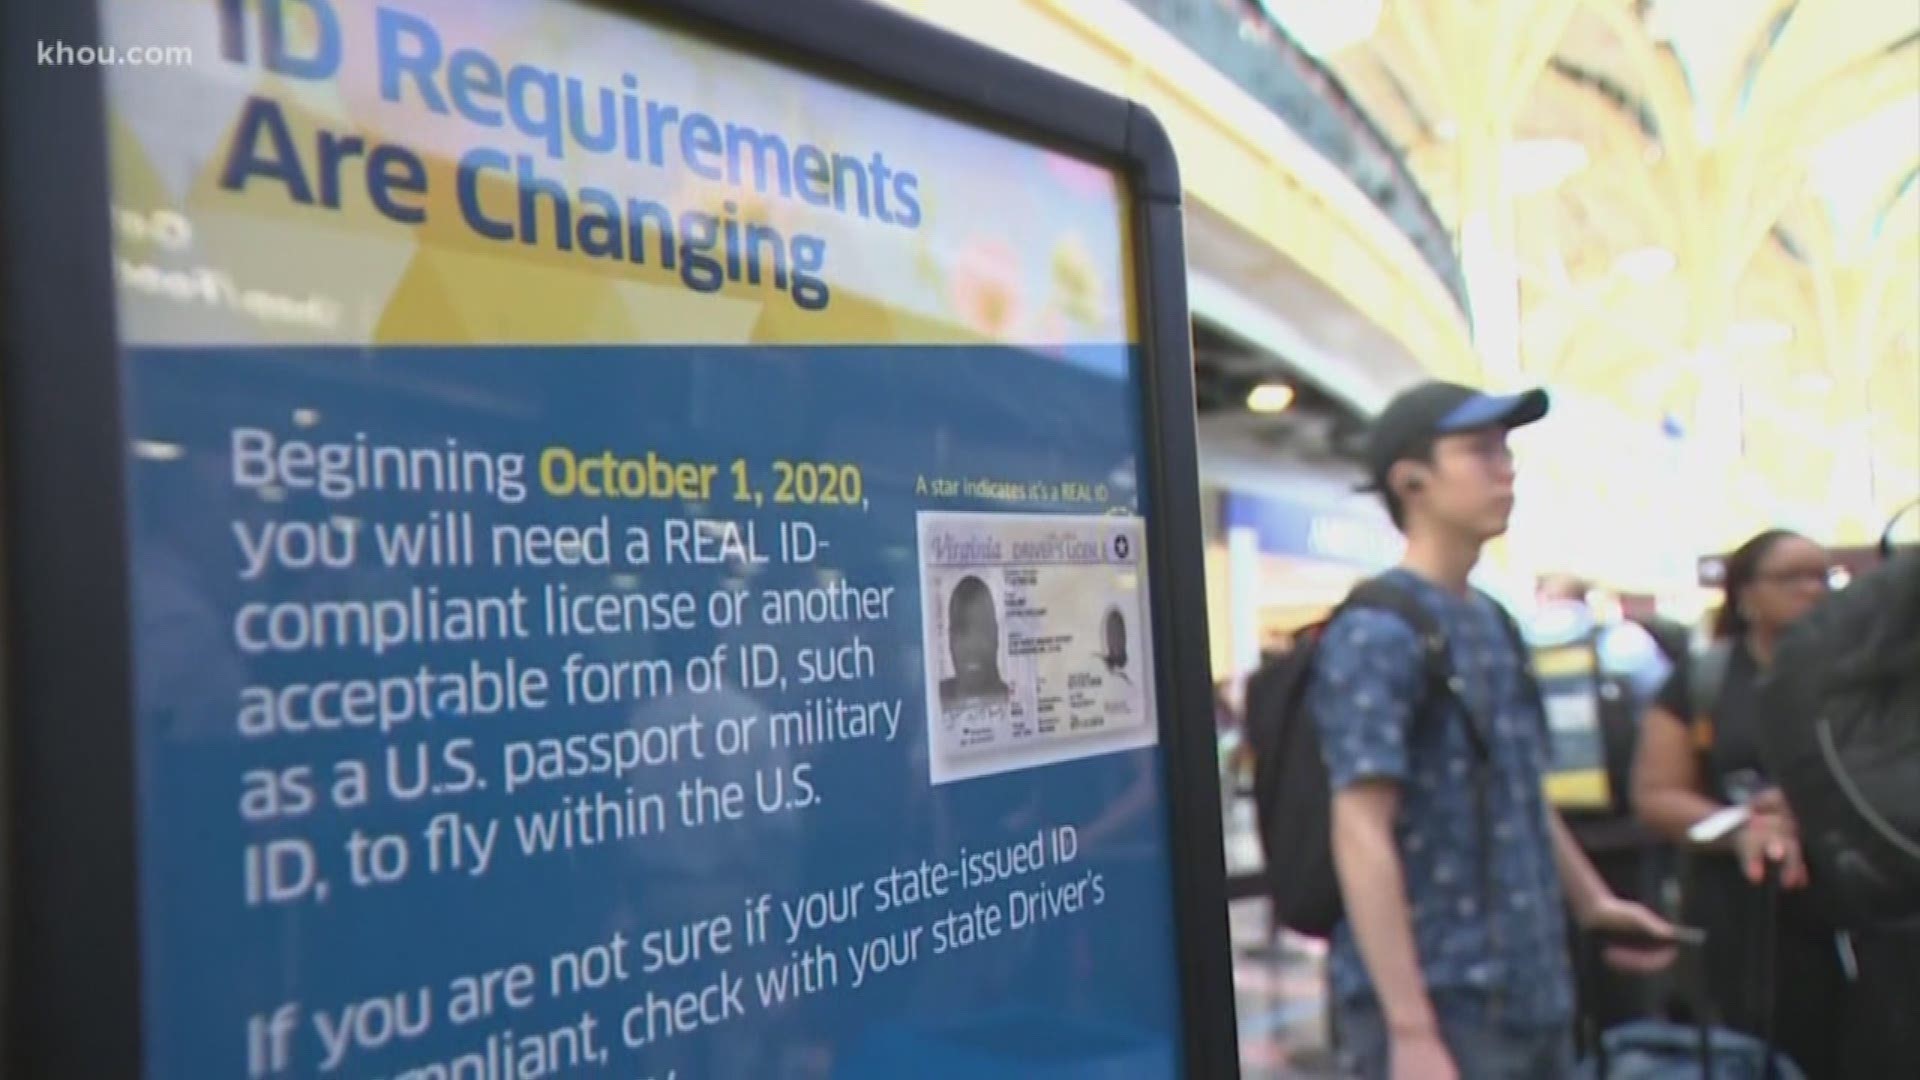 Starting later next year, your driver's license will need to meet tougher requirements if you want to fly domestically.